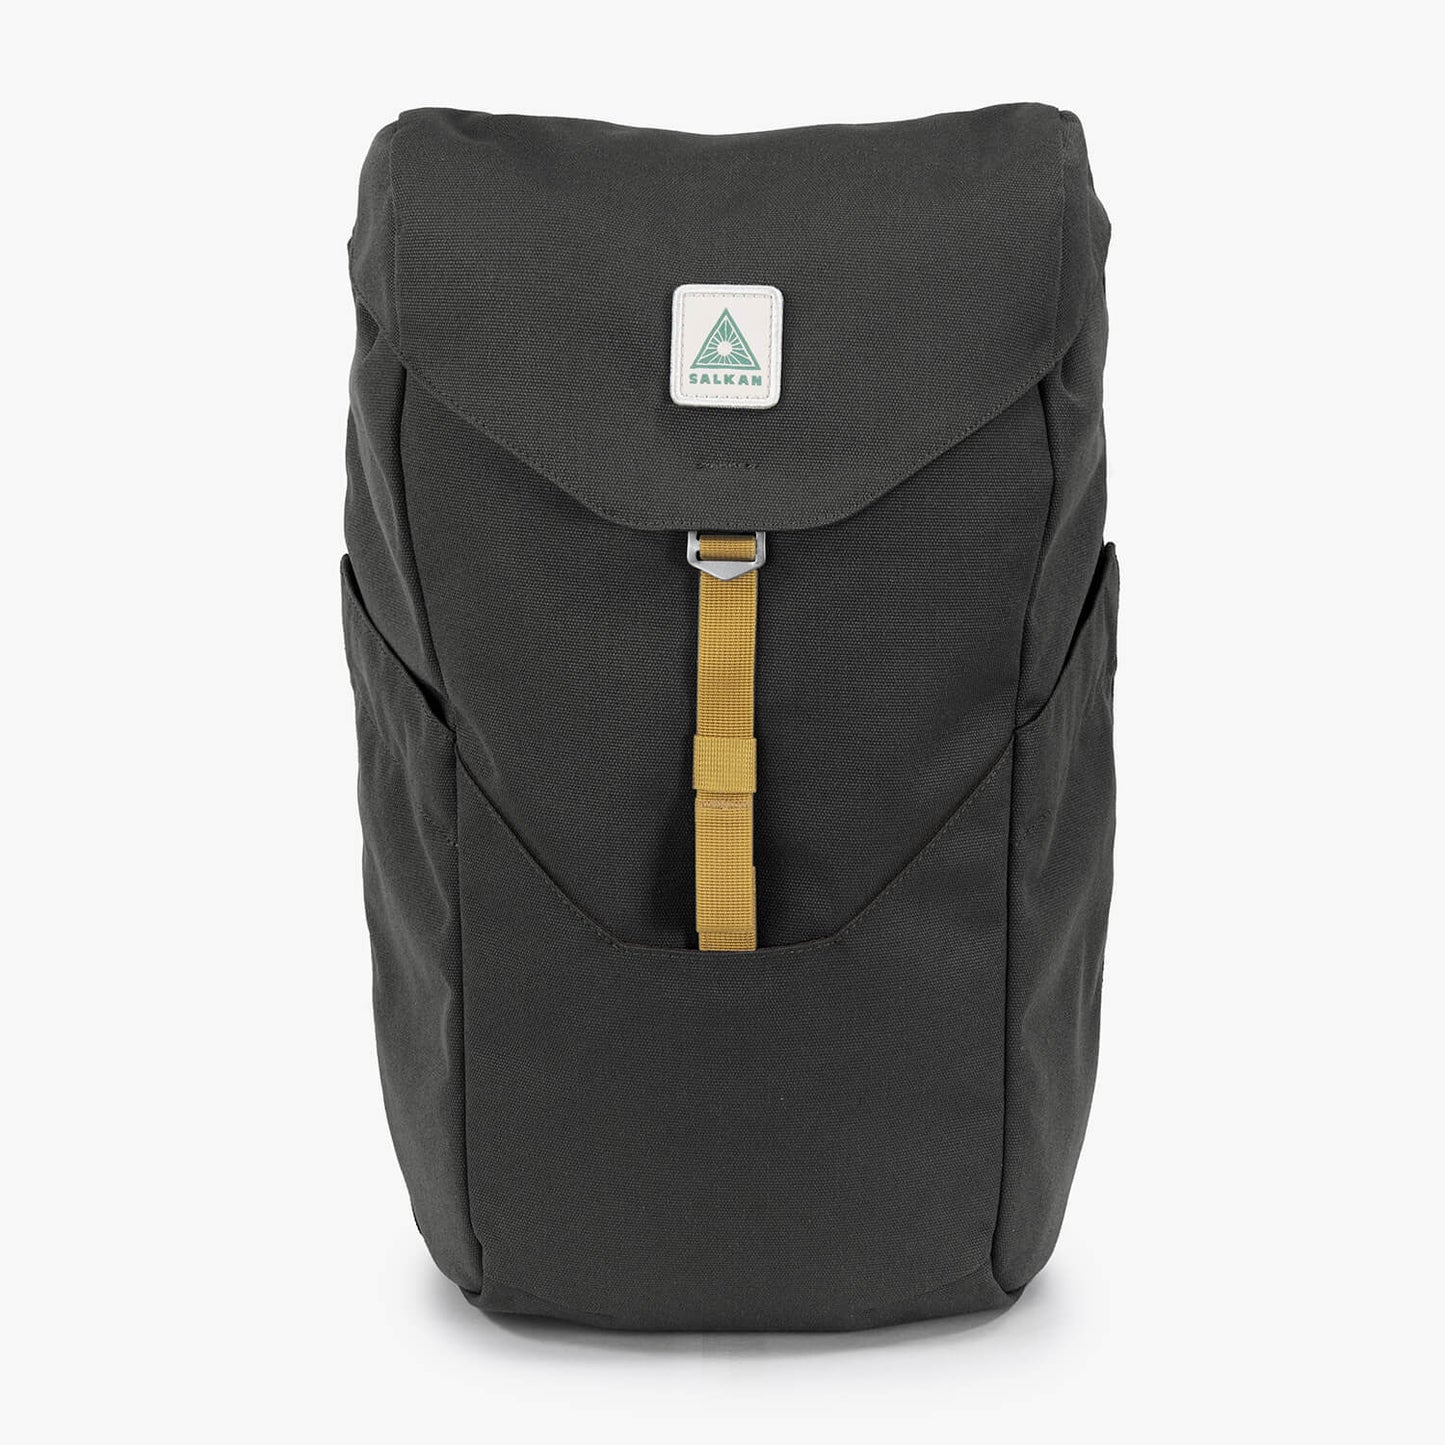 The Daypack 20L